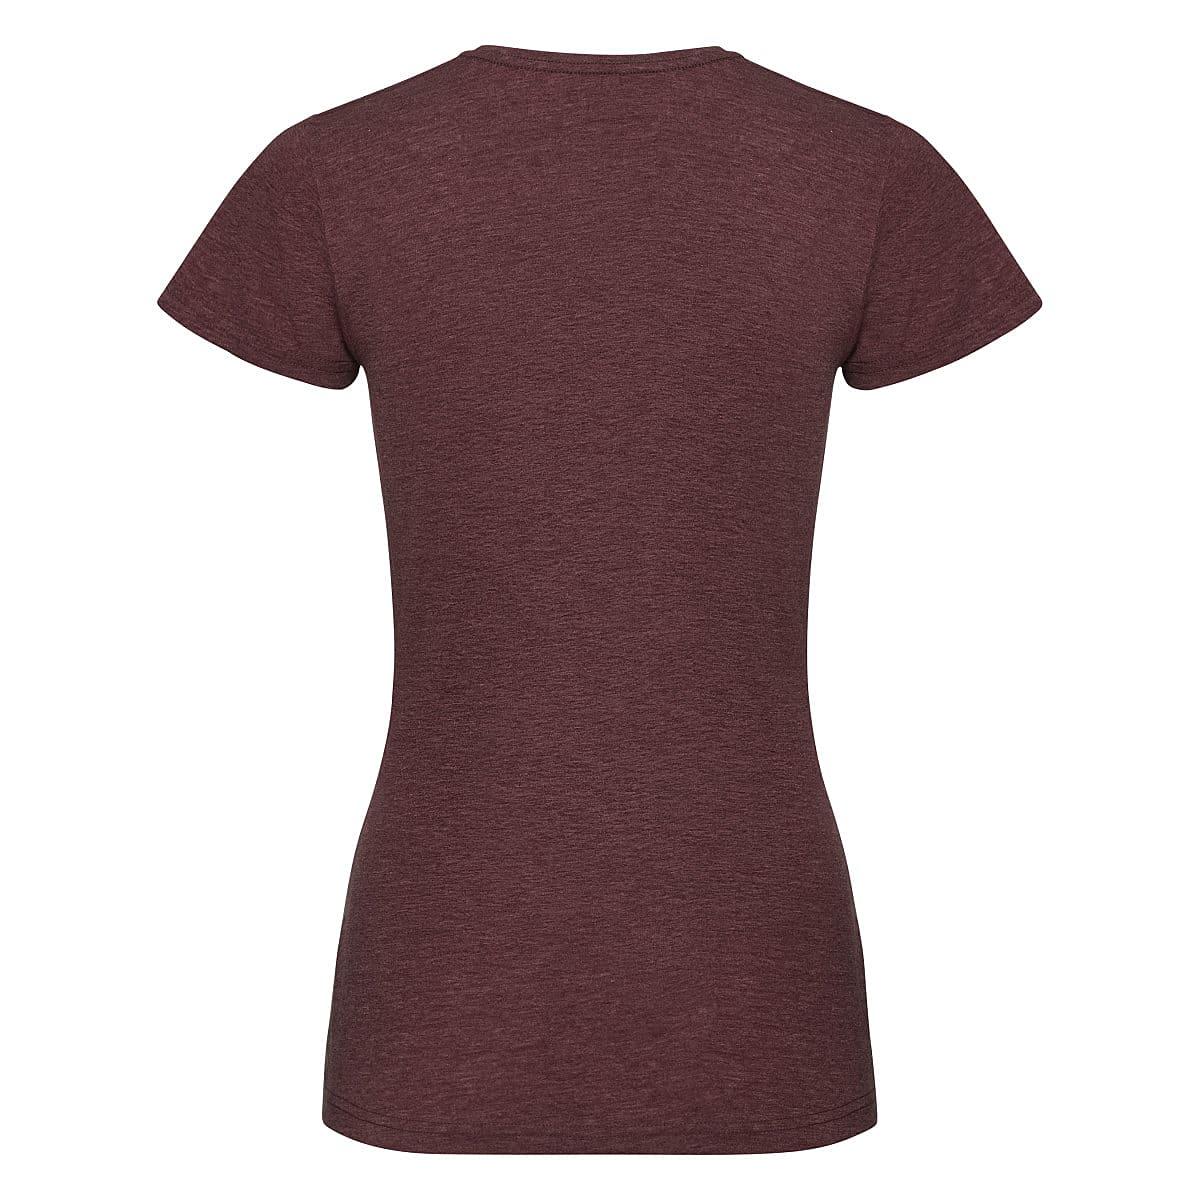 Russell Womens HD T-Shirt in Maroon Marl (Product Code: 165F)